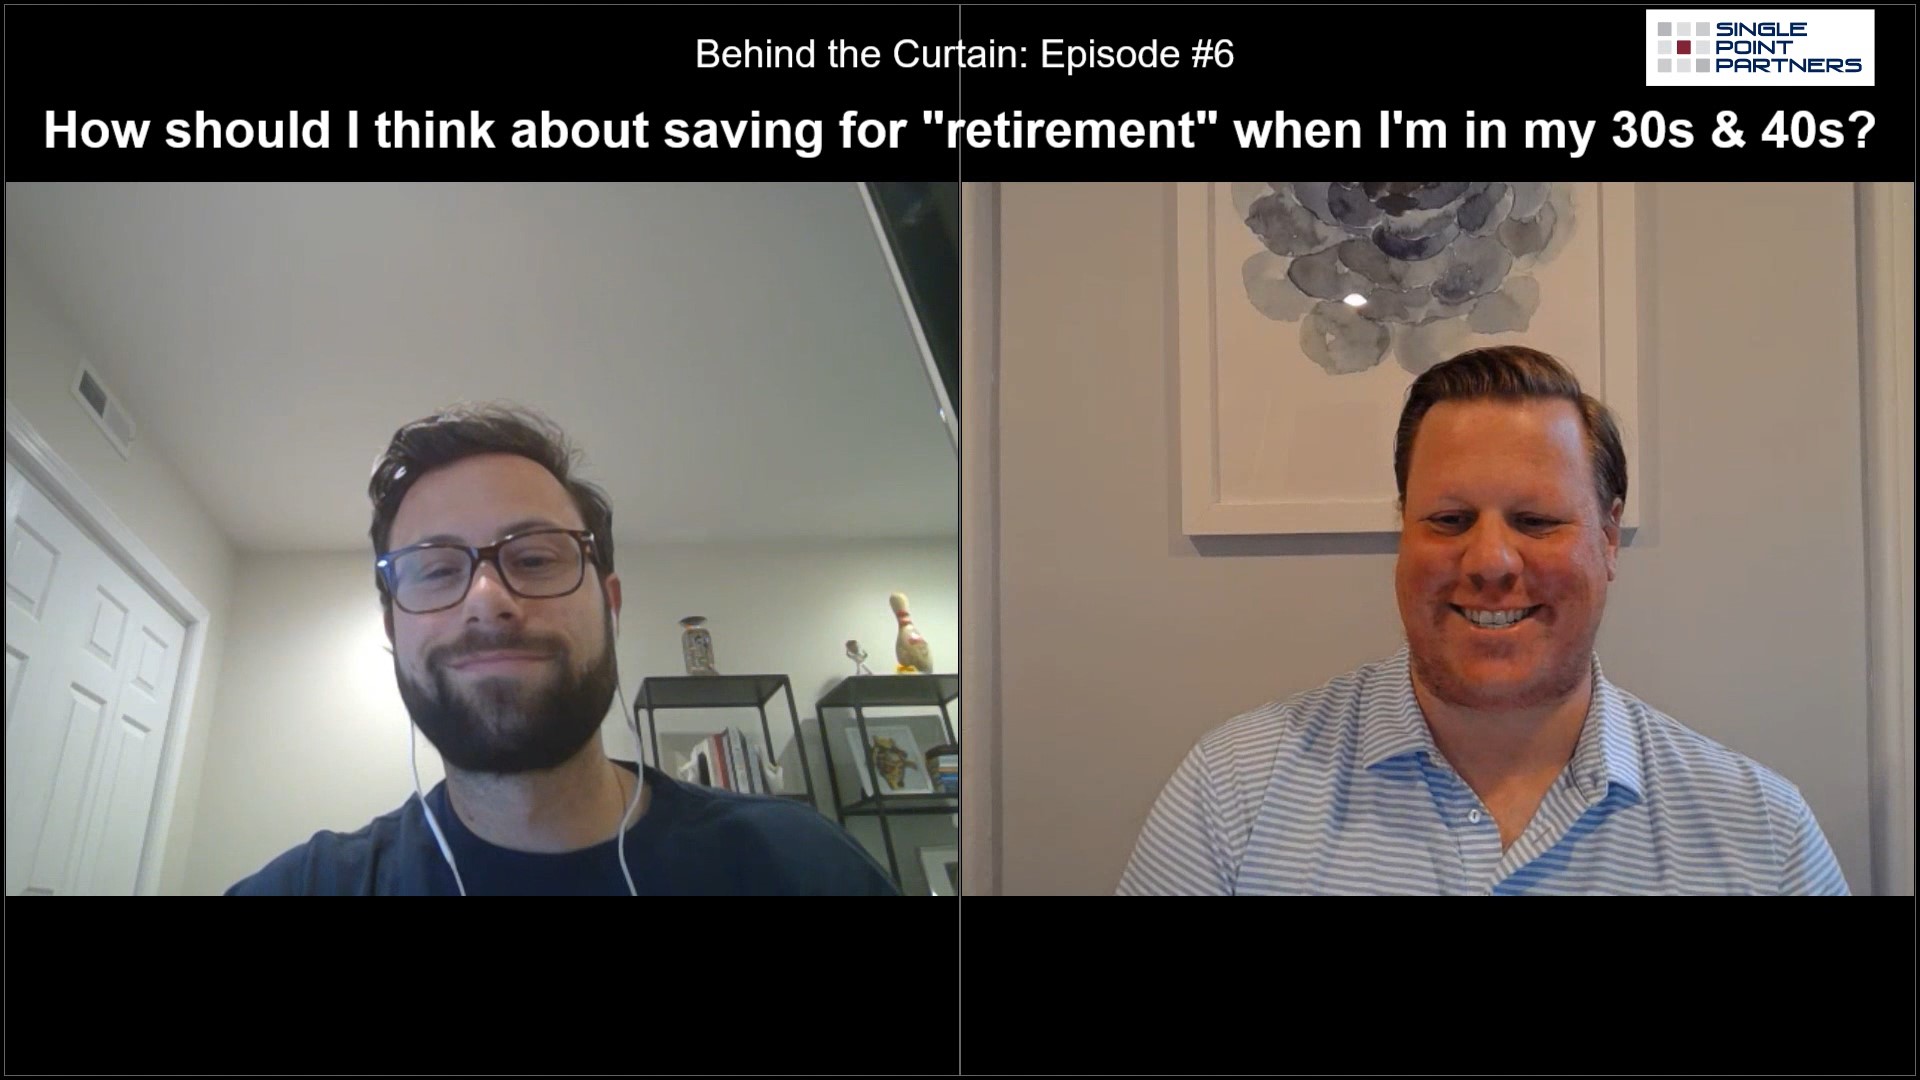 Saving for “retirement” in your 30s & 40s?